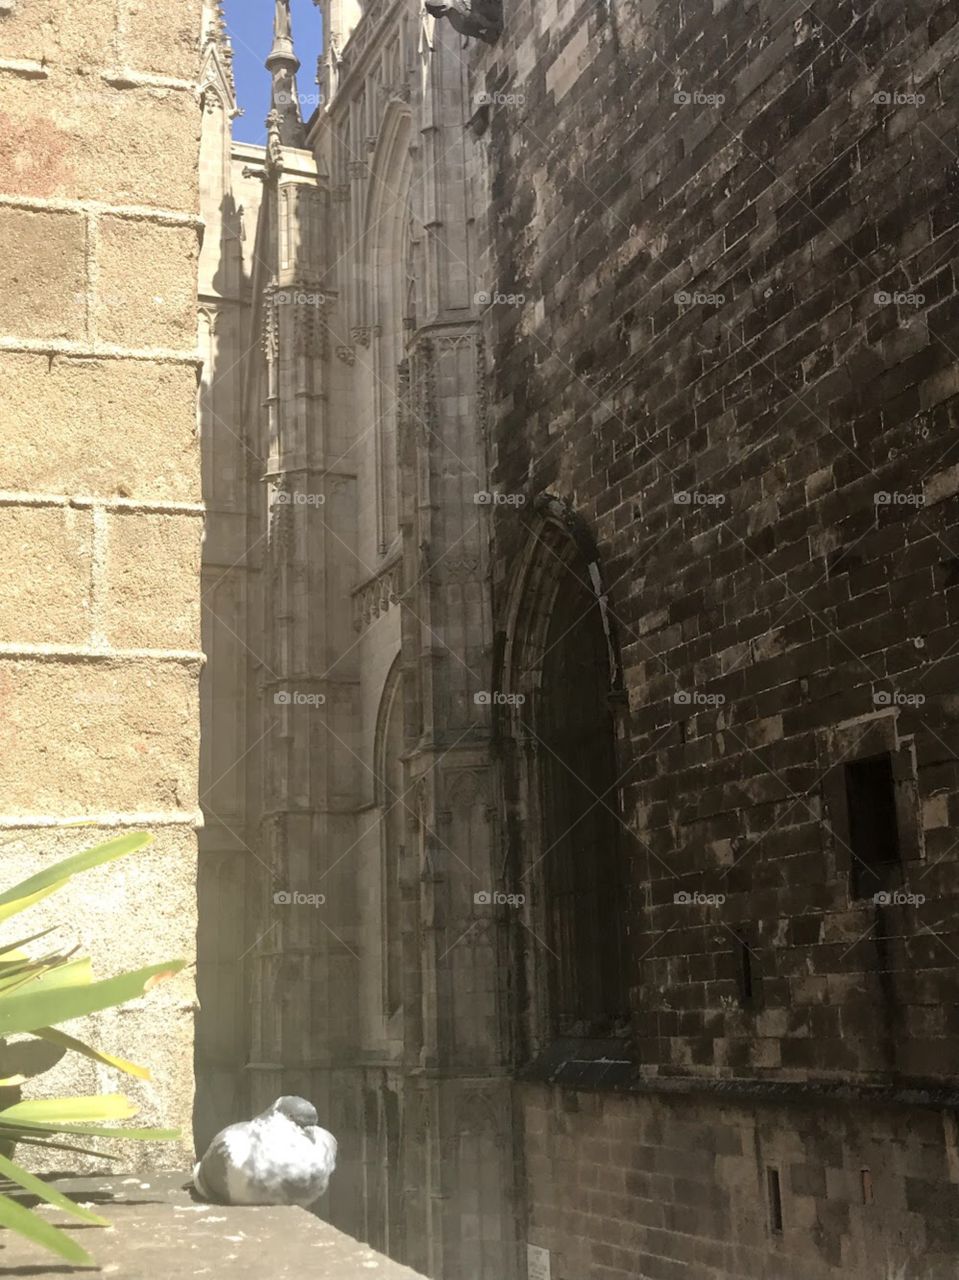 Pigeon in front of old church in Barcelona Spain 